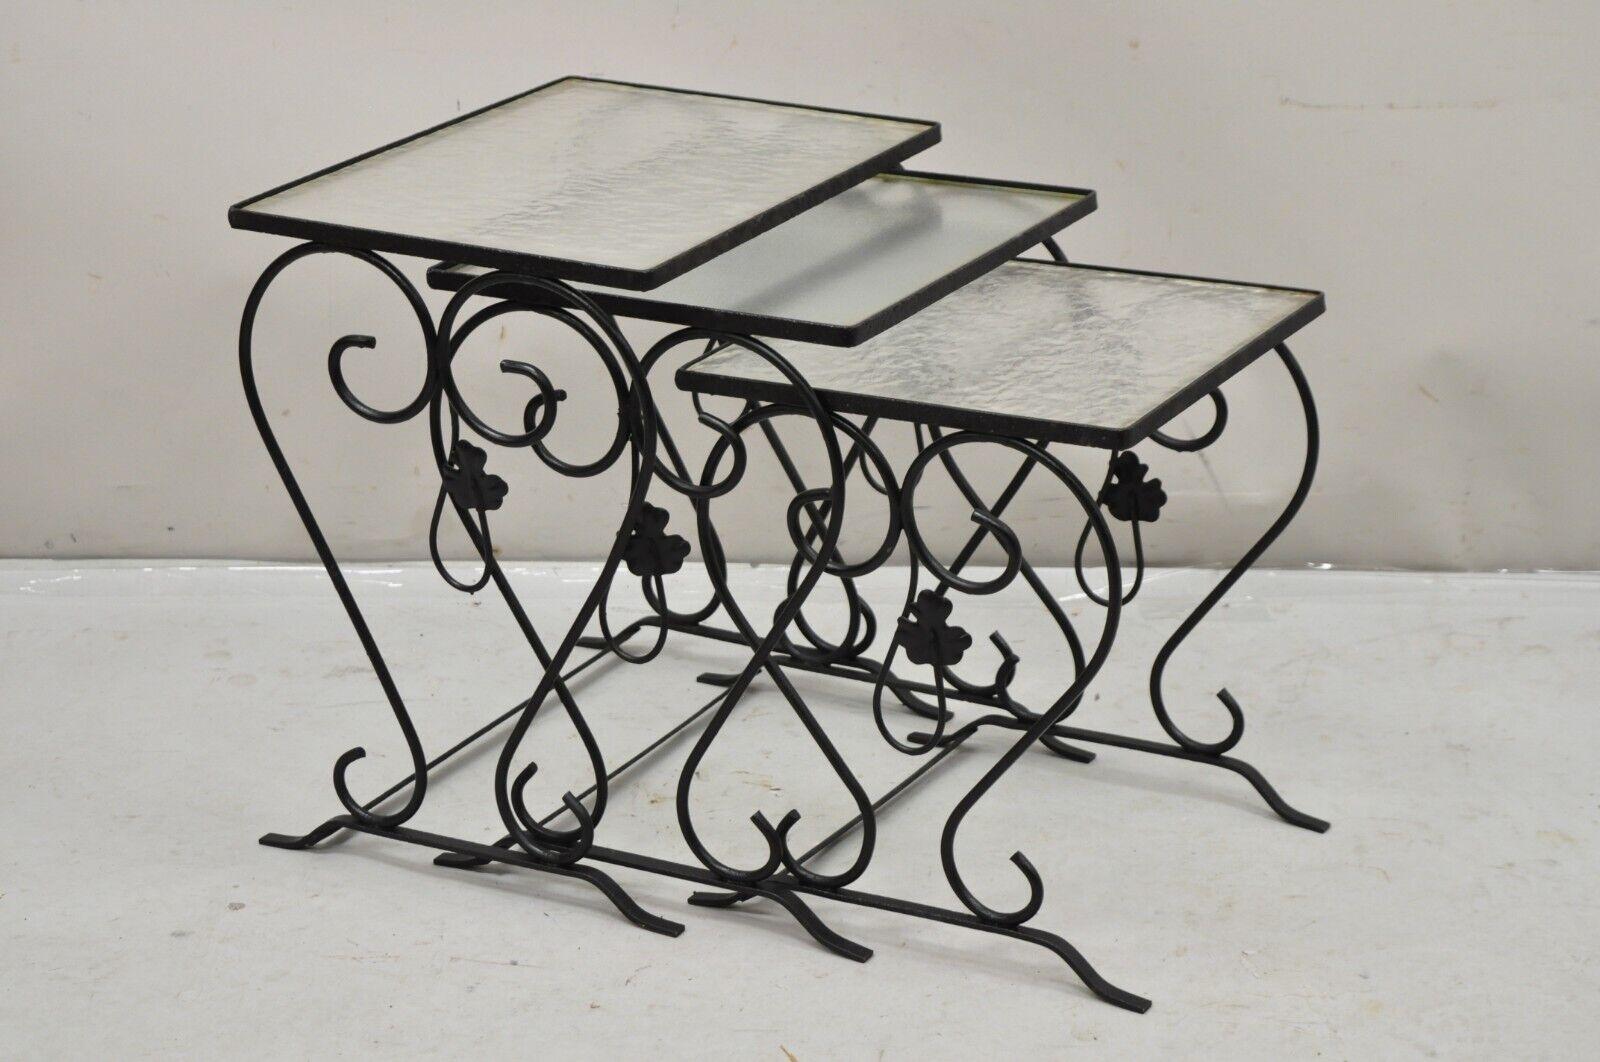 John Salterini Black Wrought Iron Maple Leaf Garden Nesting Tables - (Set of 3) with 2 pieces of textured plexiglass and one piece of textured real glass. Circa Mid 20th Century. Measurements: Largest Table: 18